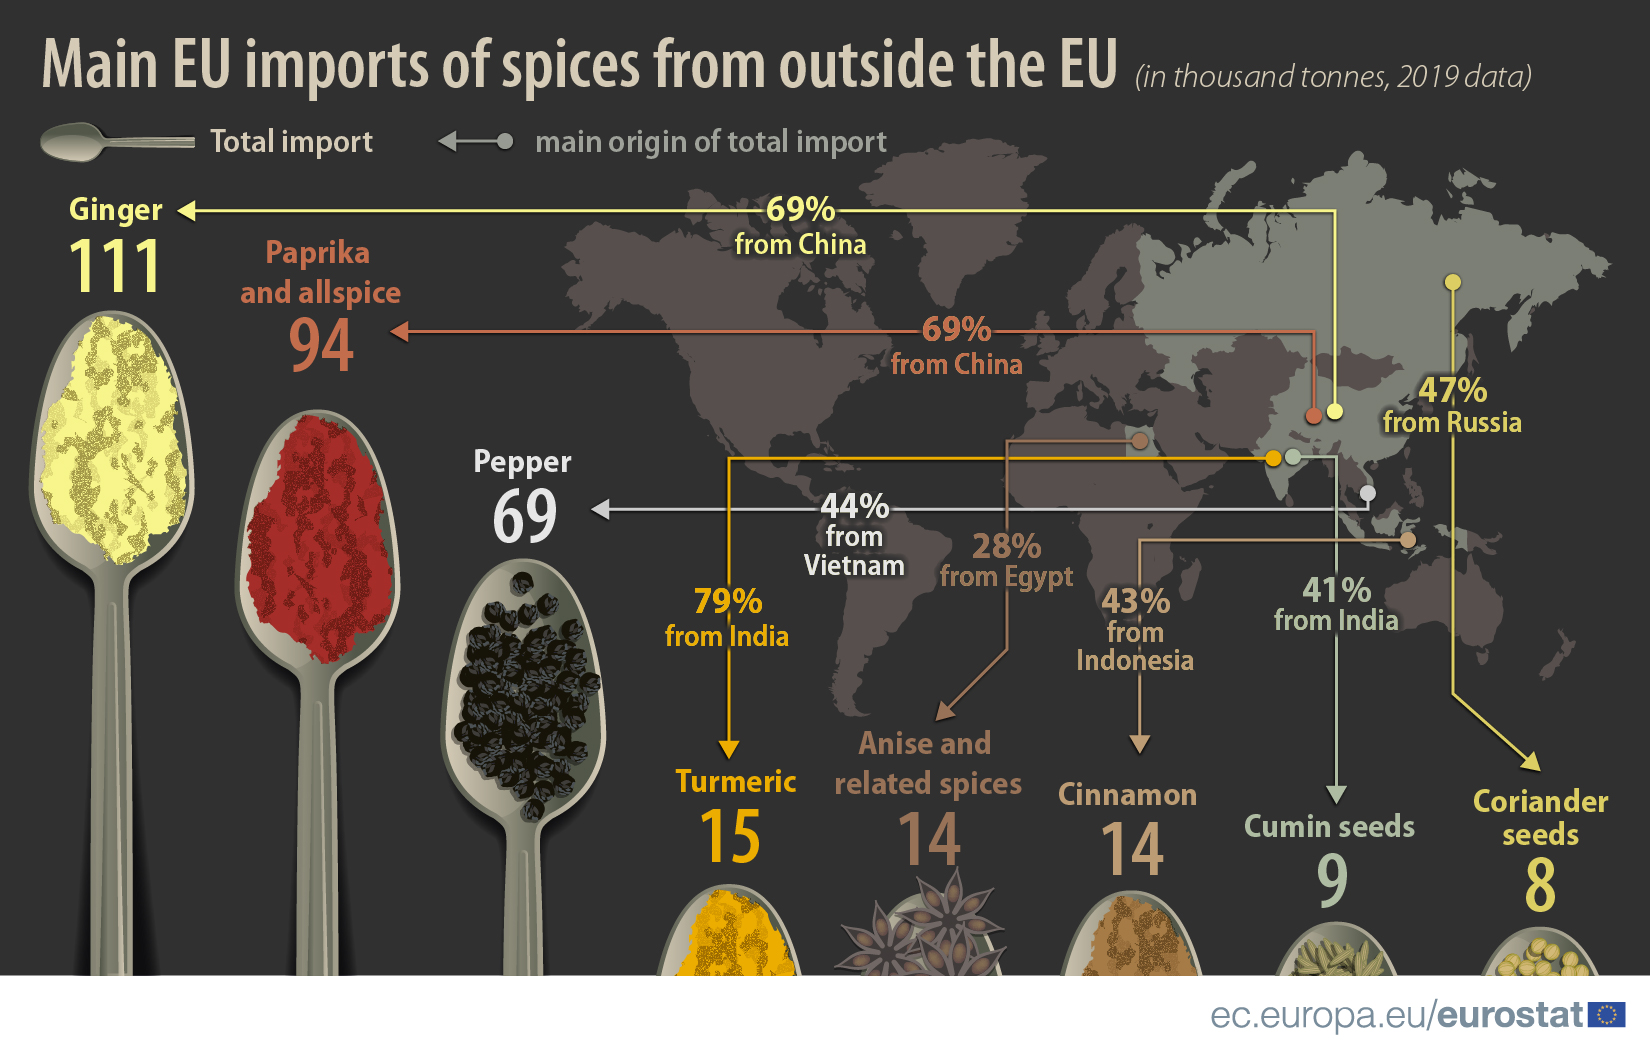 Main EU imports of spices from outside EU, 2019